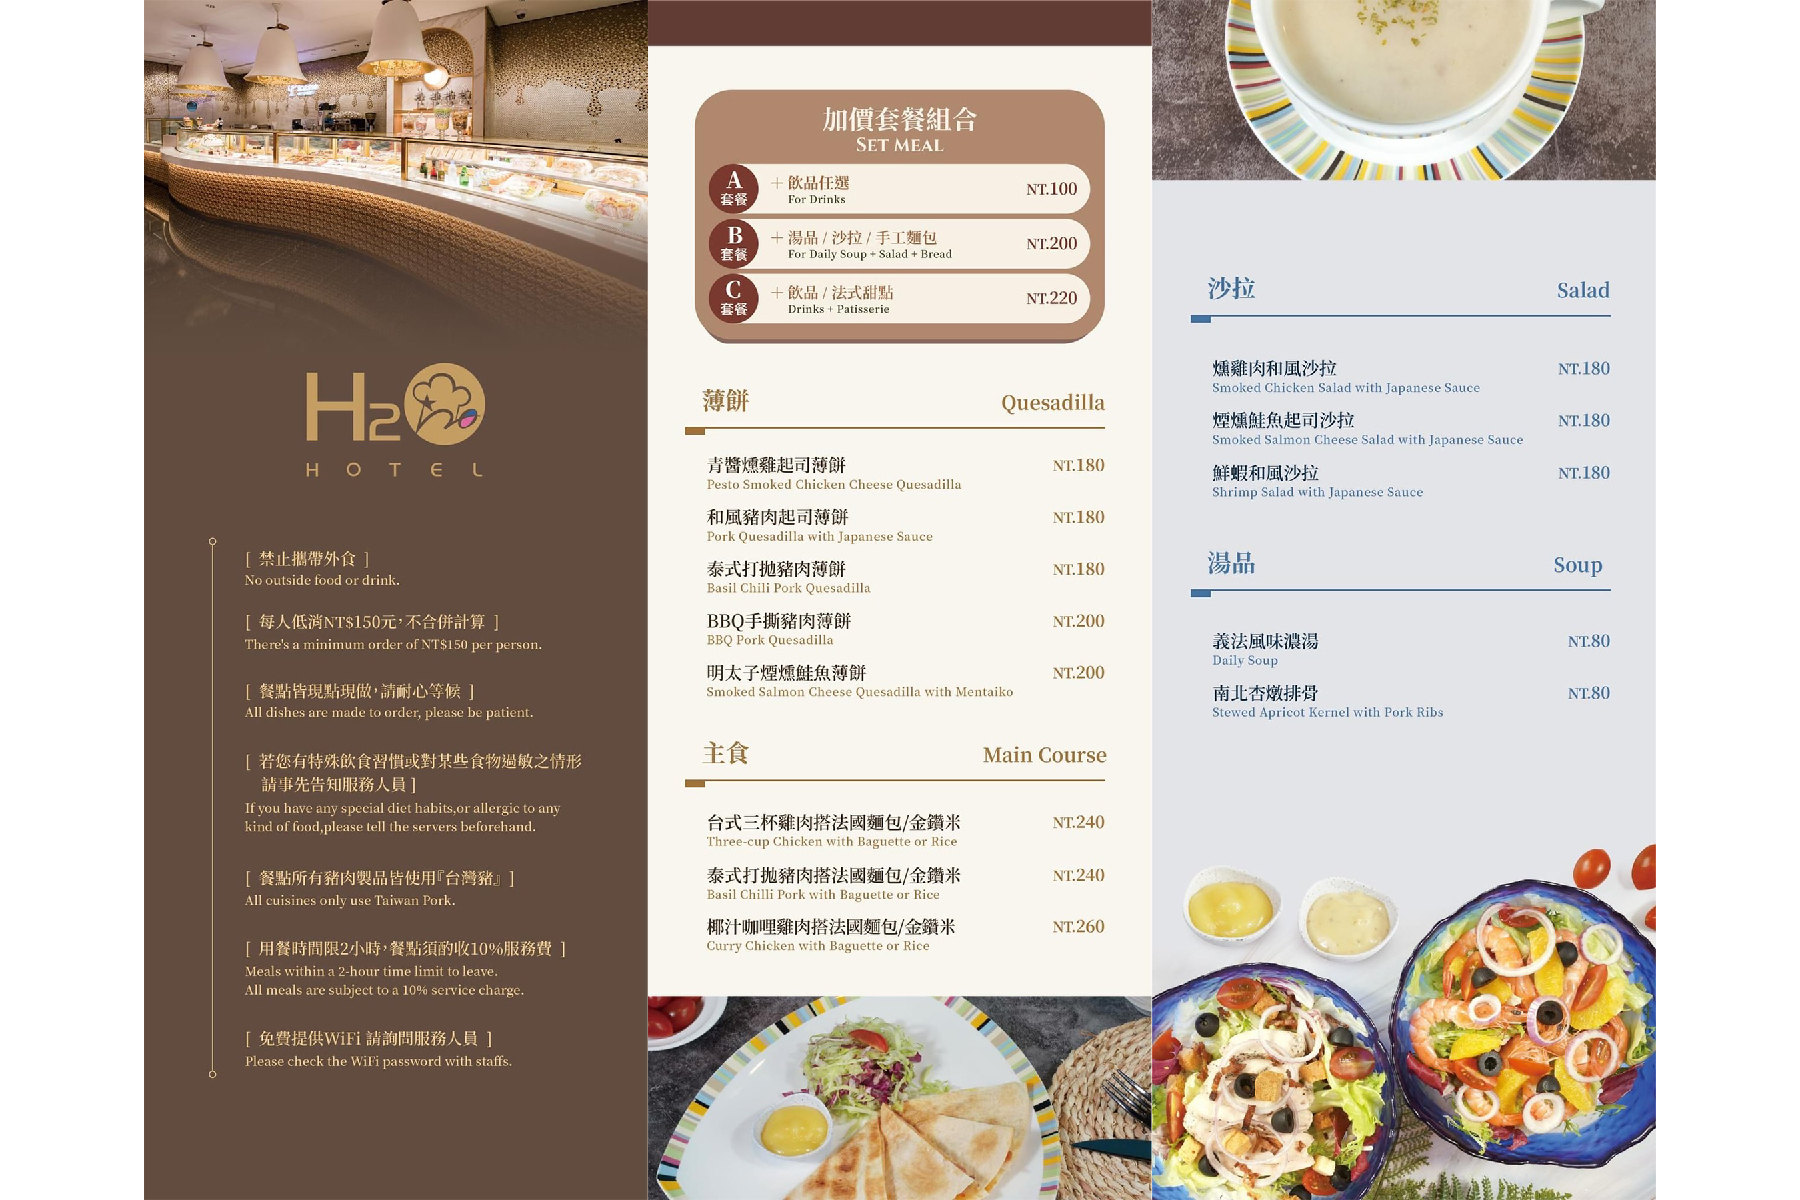 ◆H2O Bakery-350元商品抵用券8